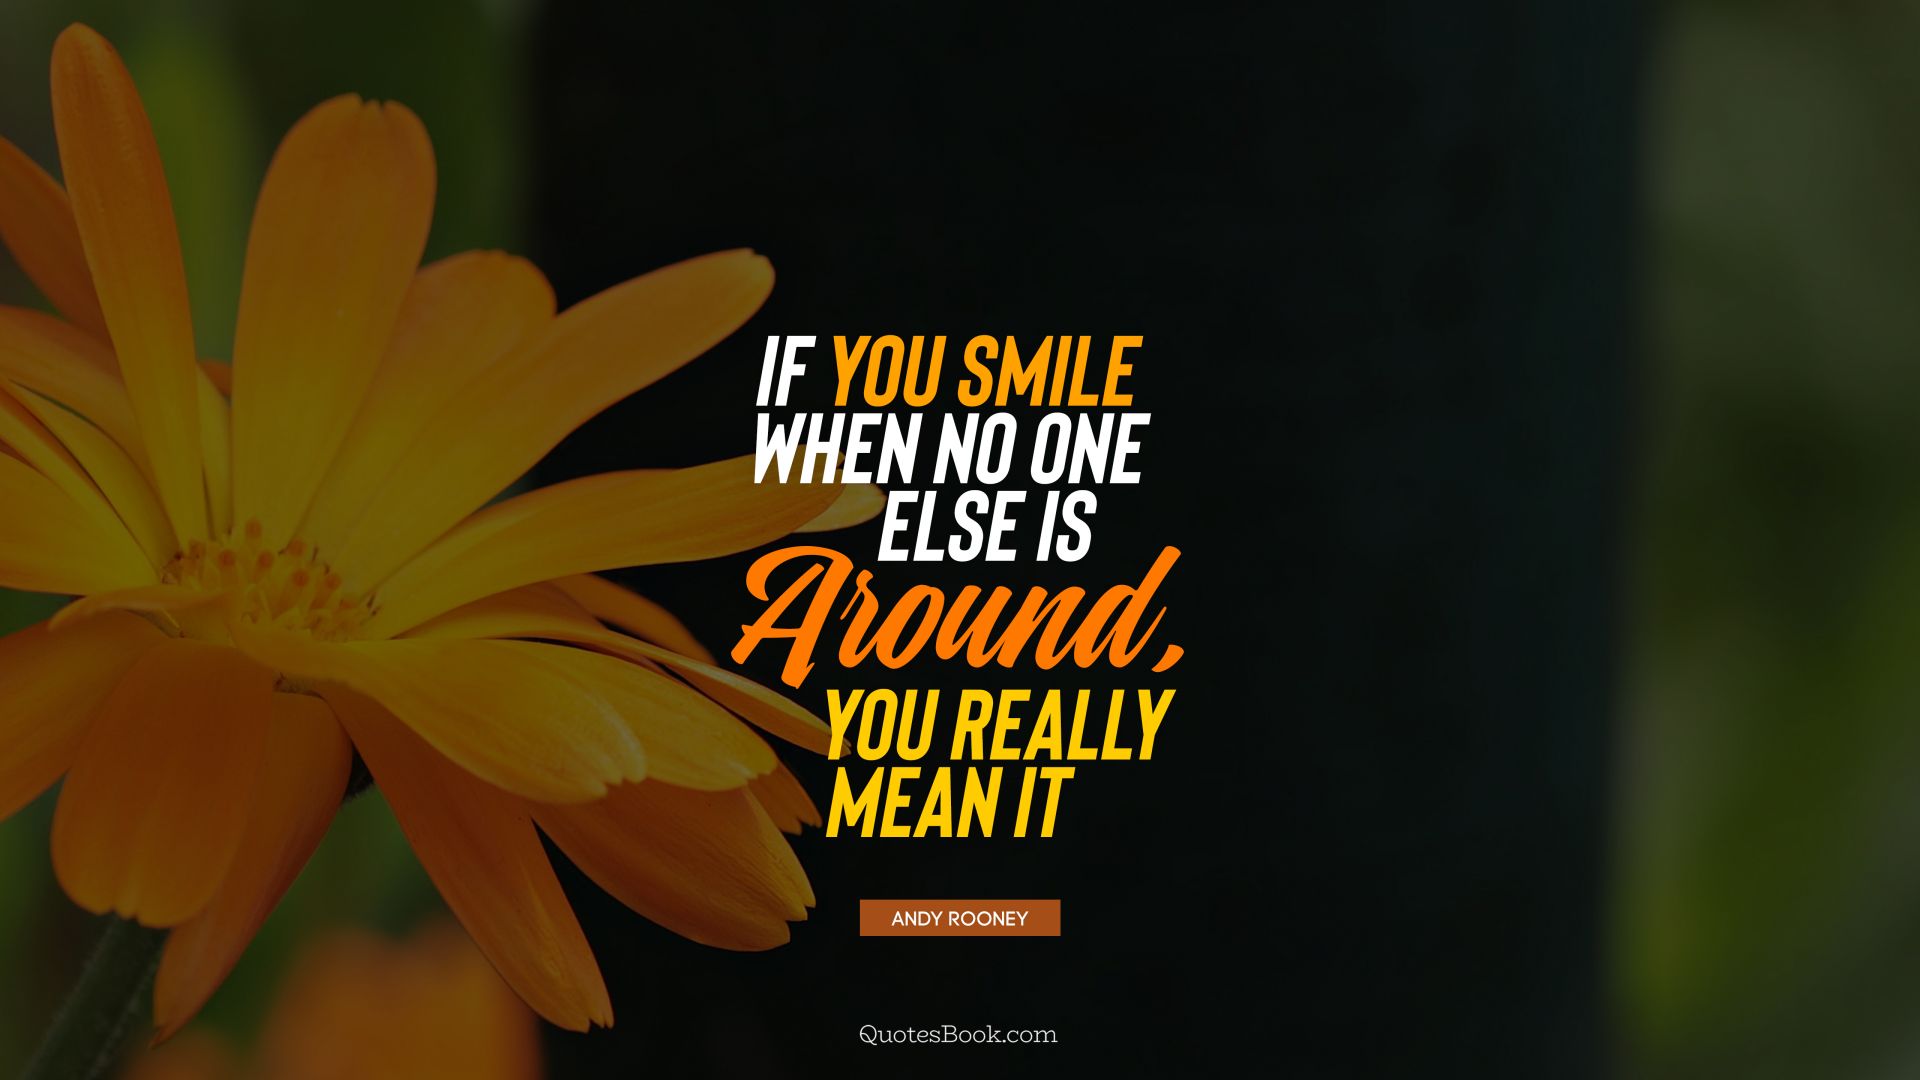 If you smile when no one else is around, you really mean it. - Quote by Andy Rooney